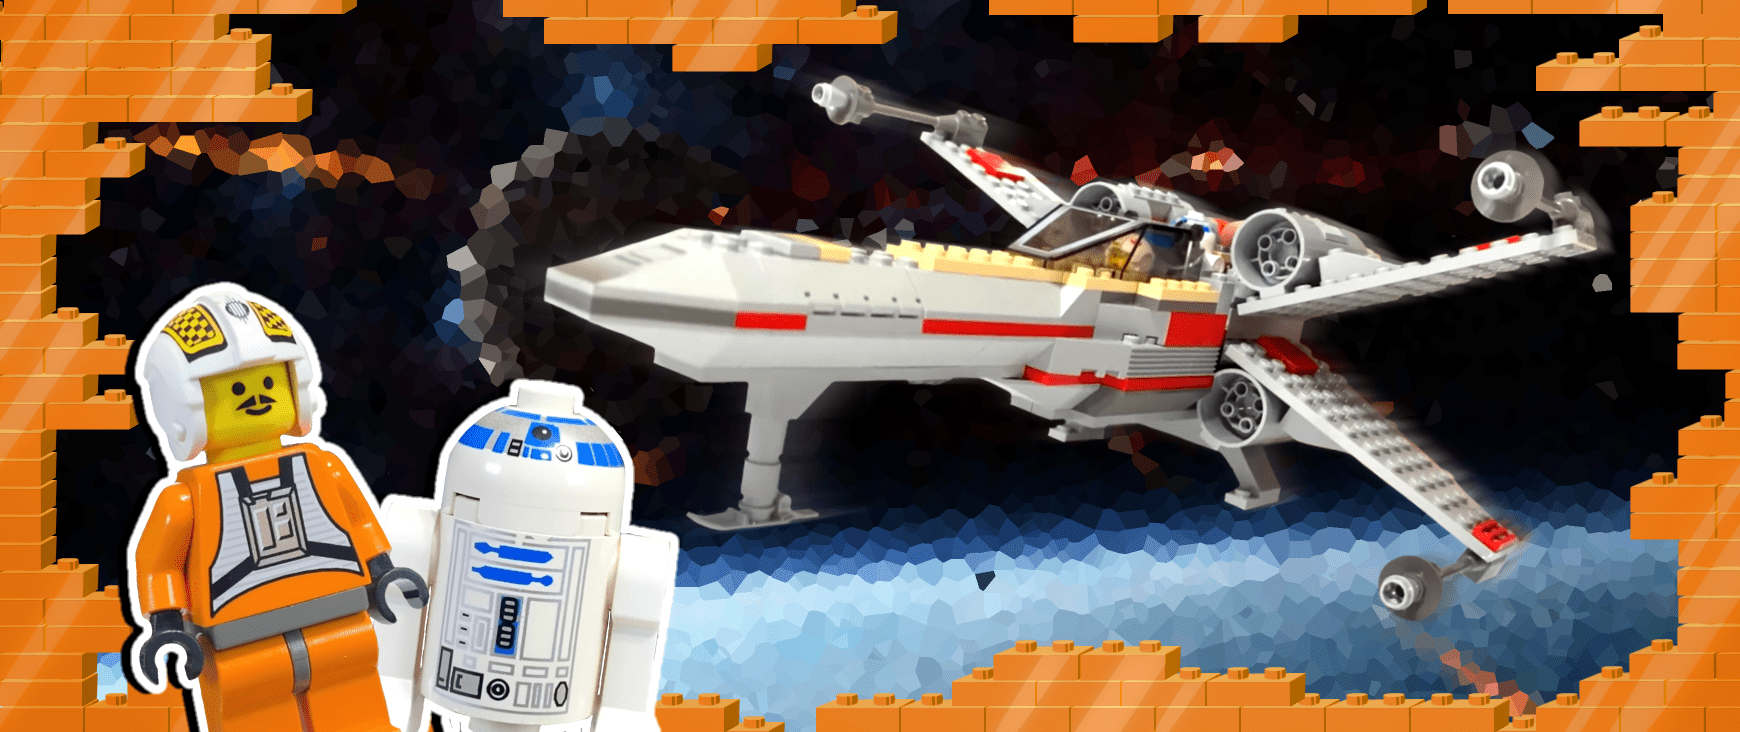 Star Wars X-Wing Fighter Lego set from 1999